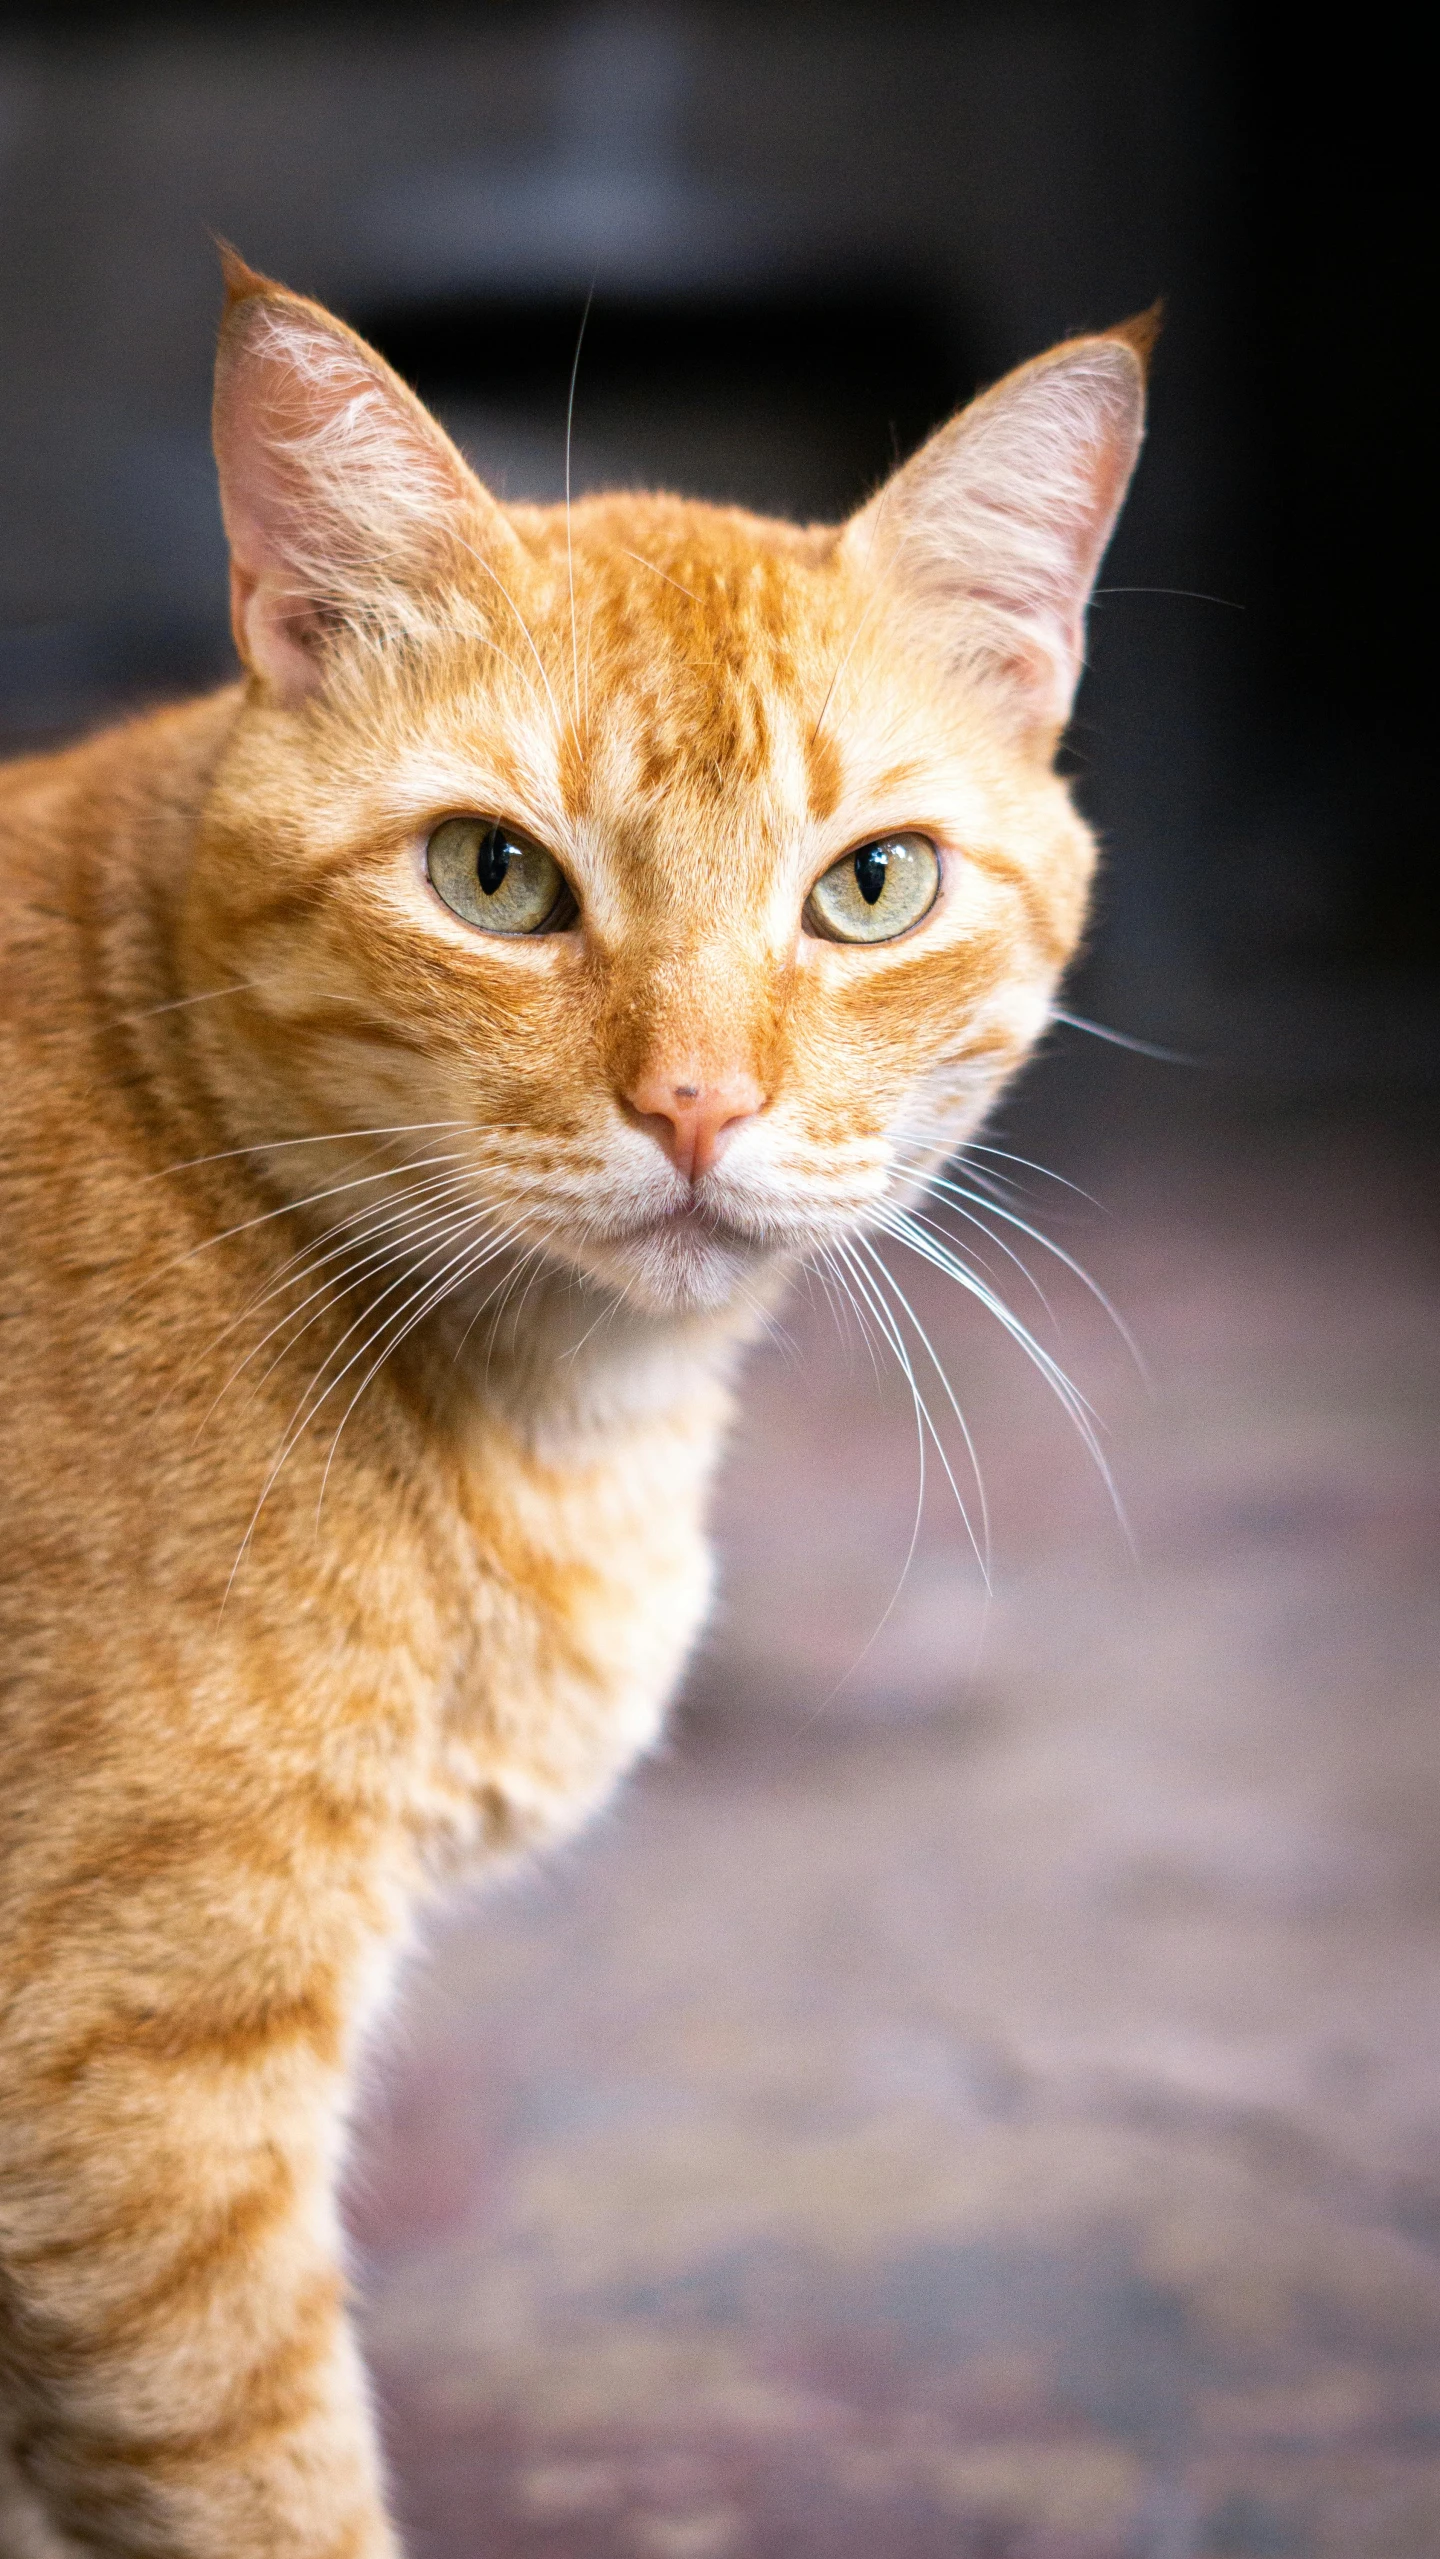 a tan cat stands looking at the camera